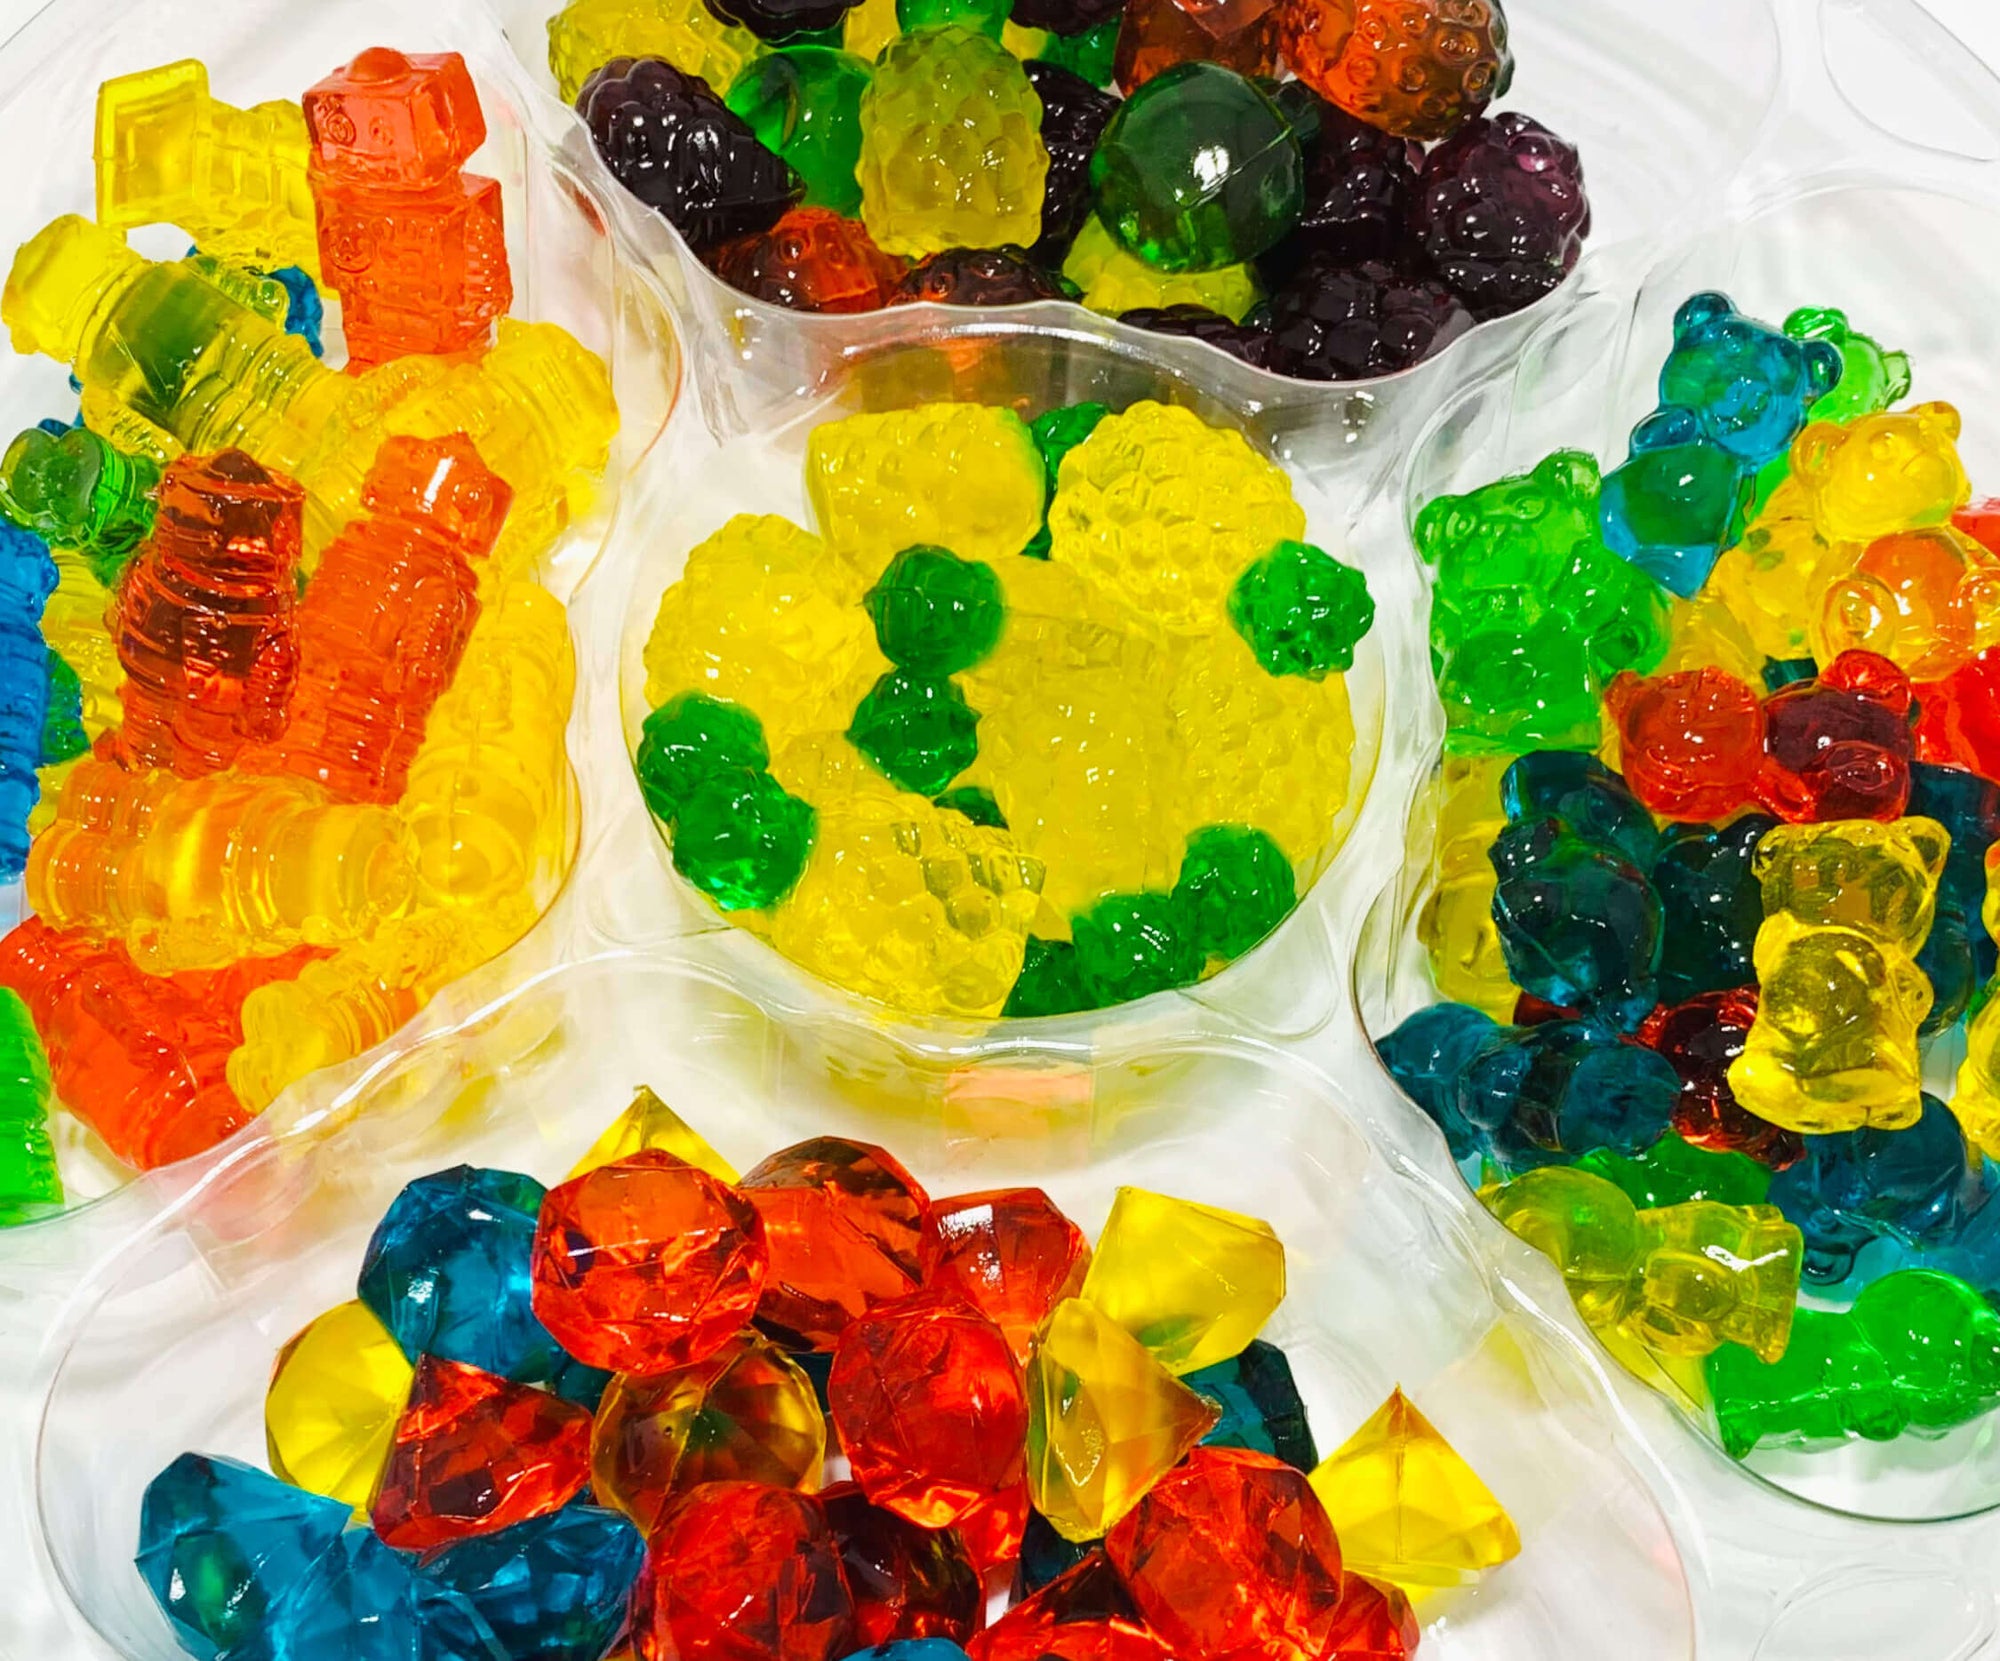 3D Gummy Fruits - Candy Store